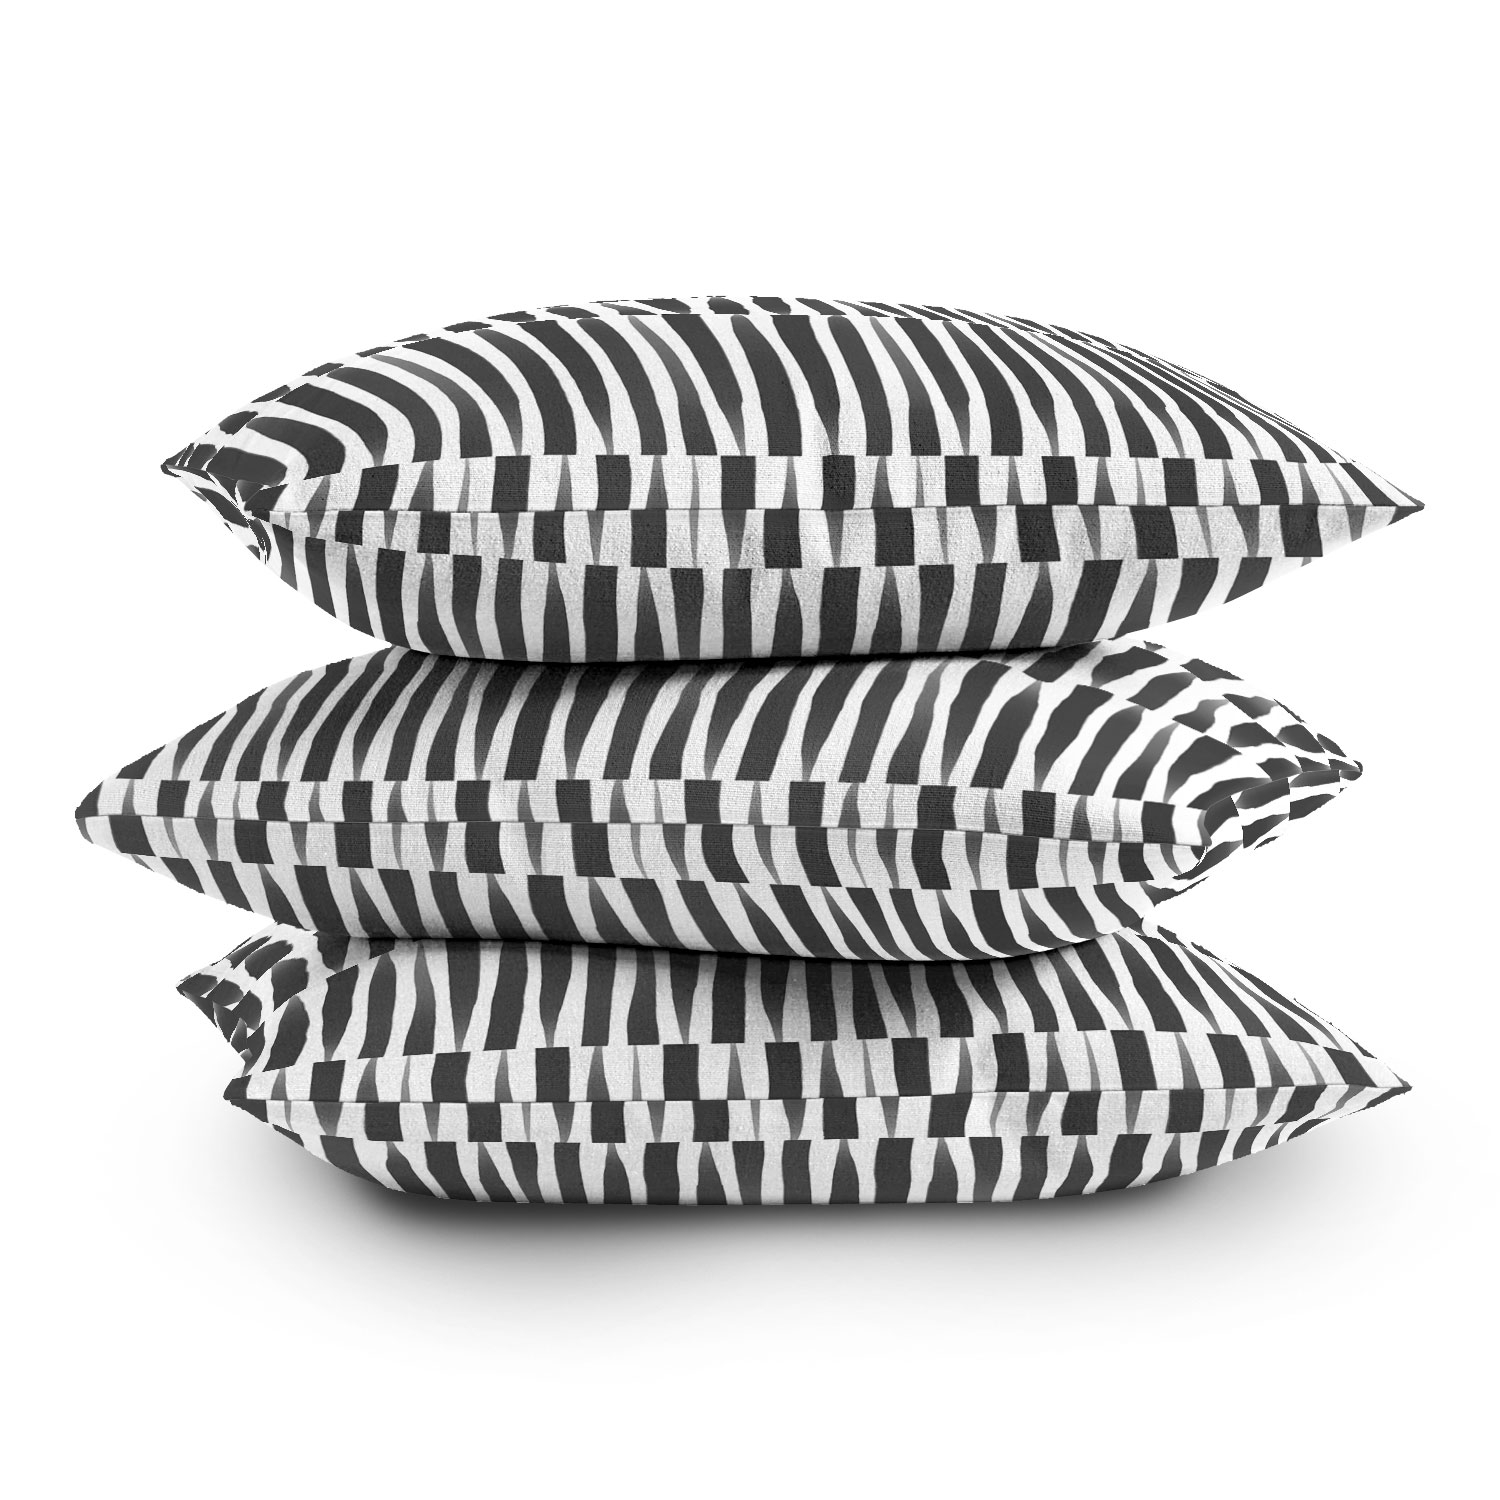 Bw Abstract Theme by Emanuela Carratoni - Outdoor Throw Pillow 18" x 18" - Image 2